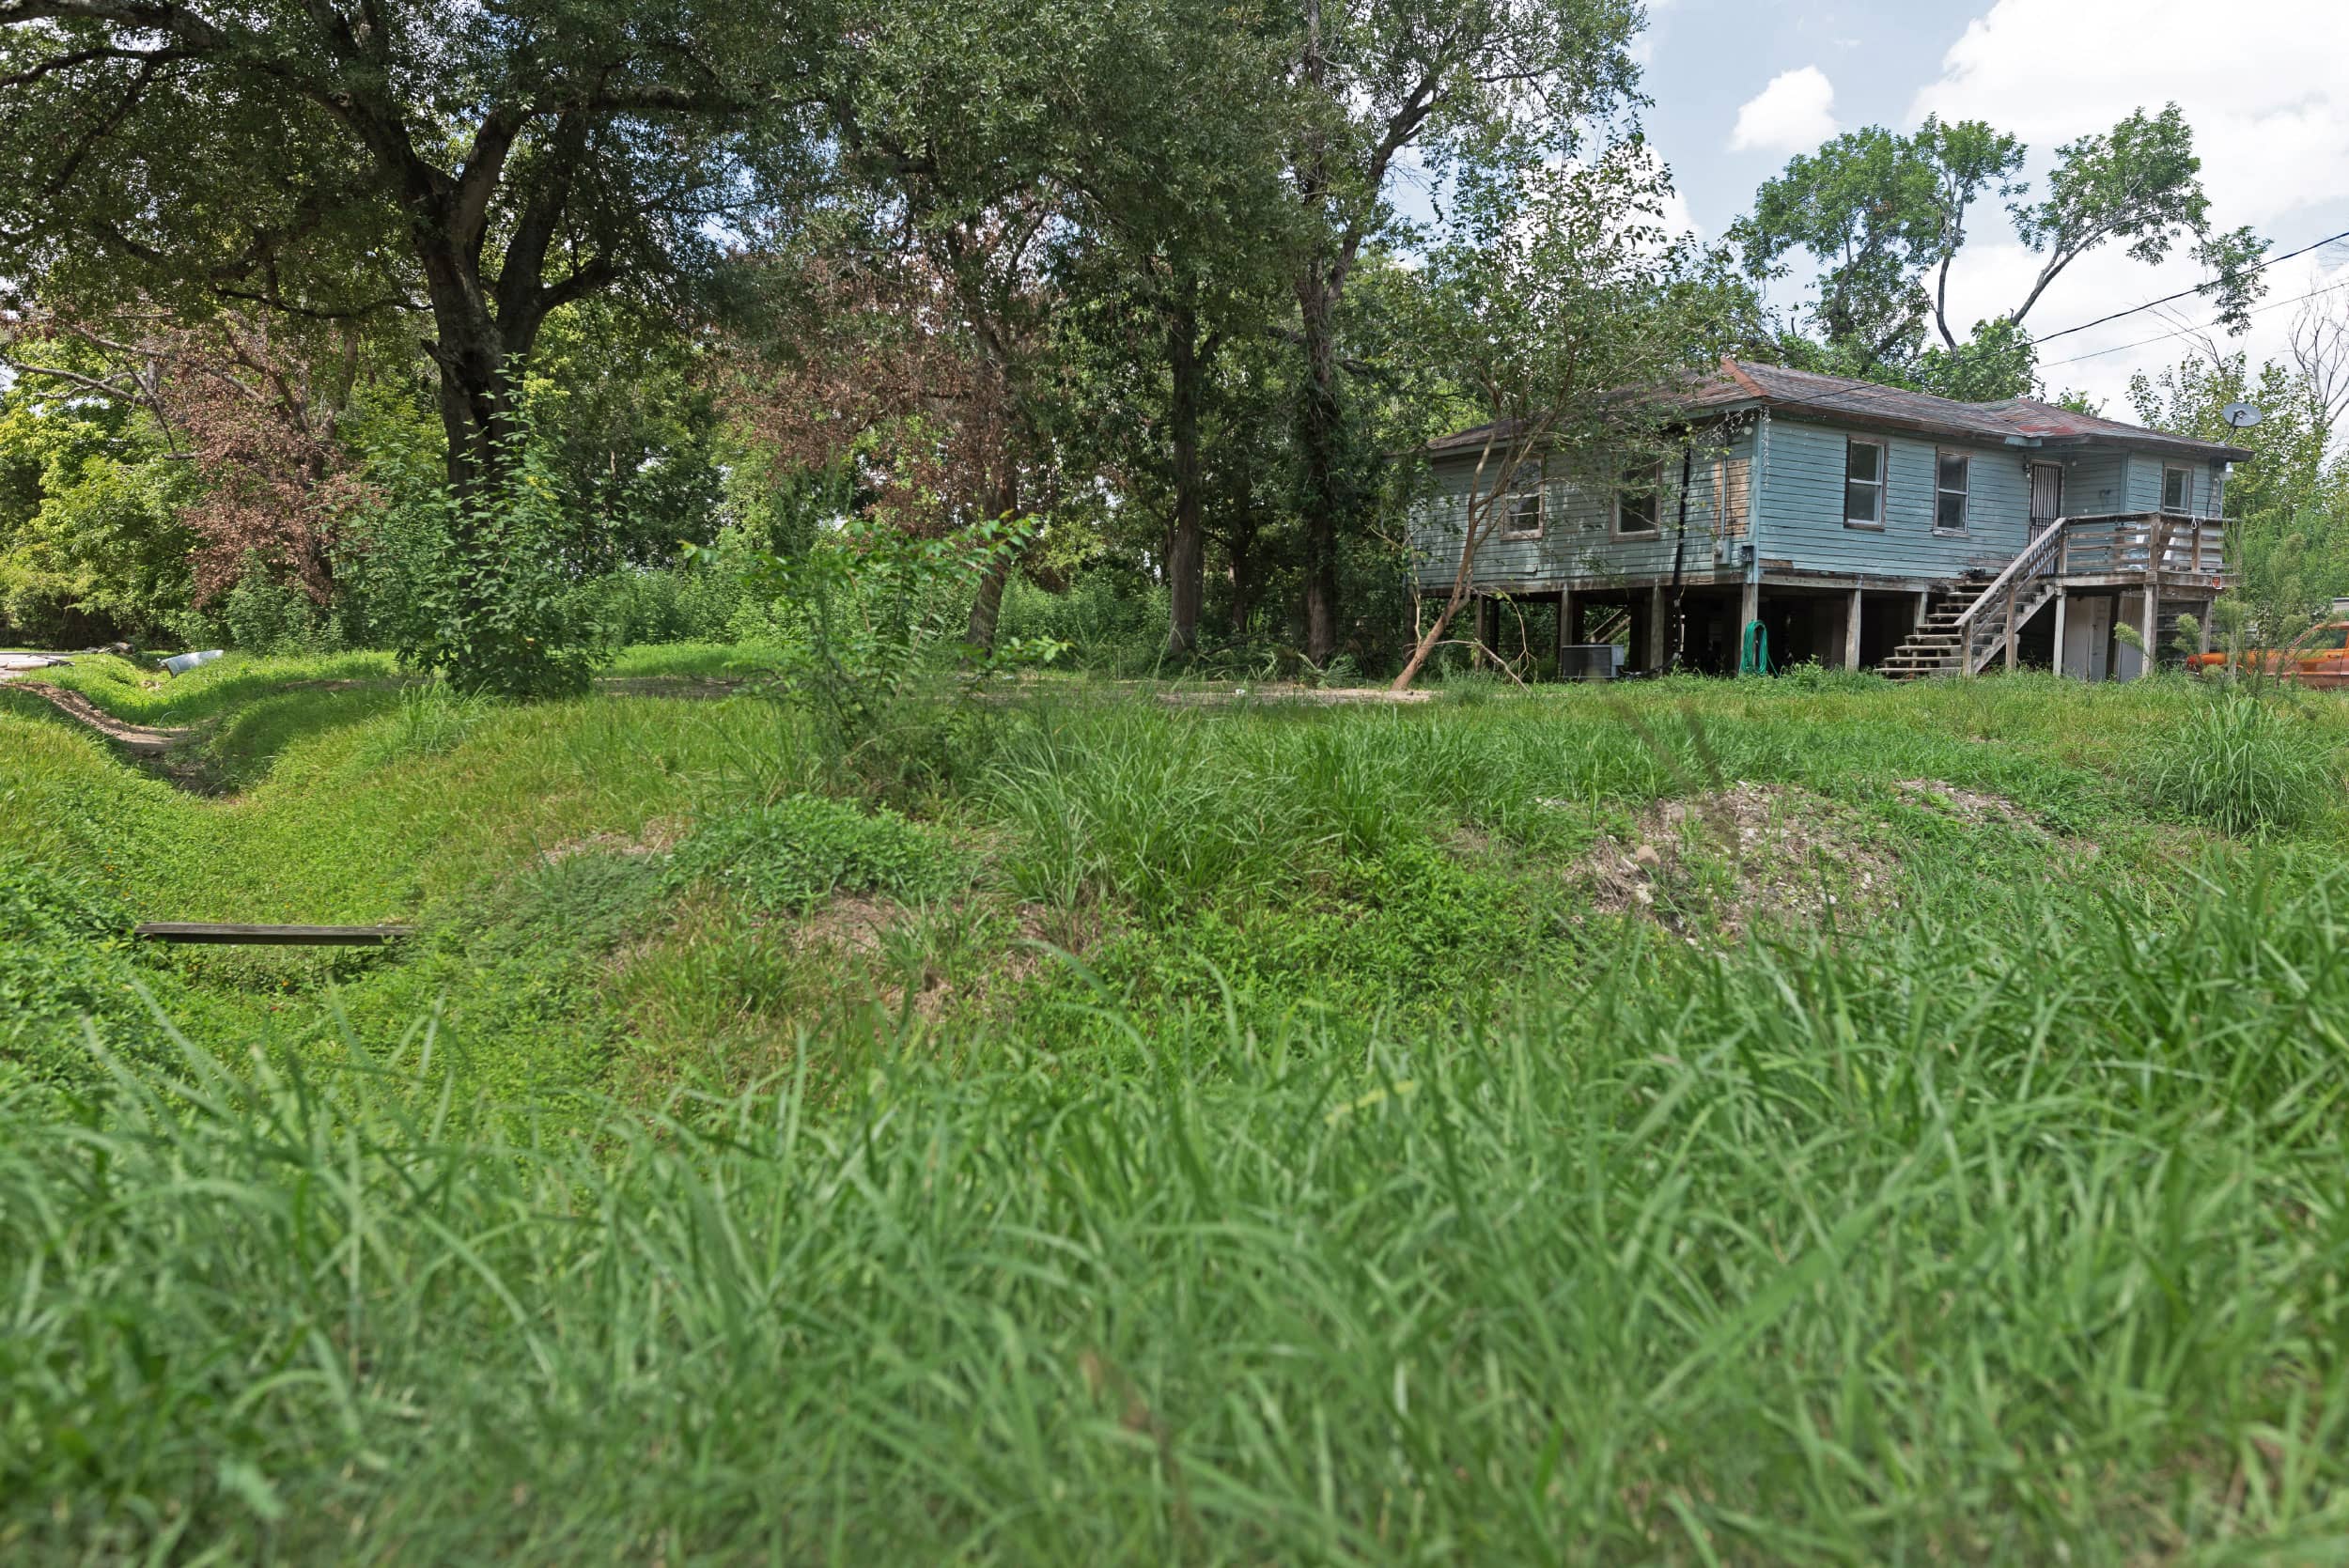 A grass-covered lot where a home once stood